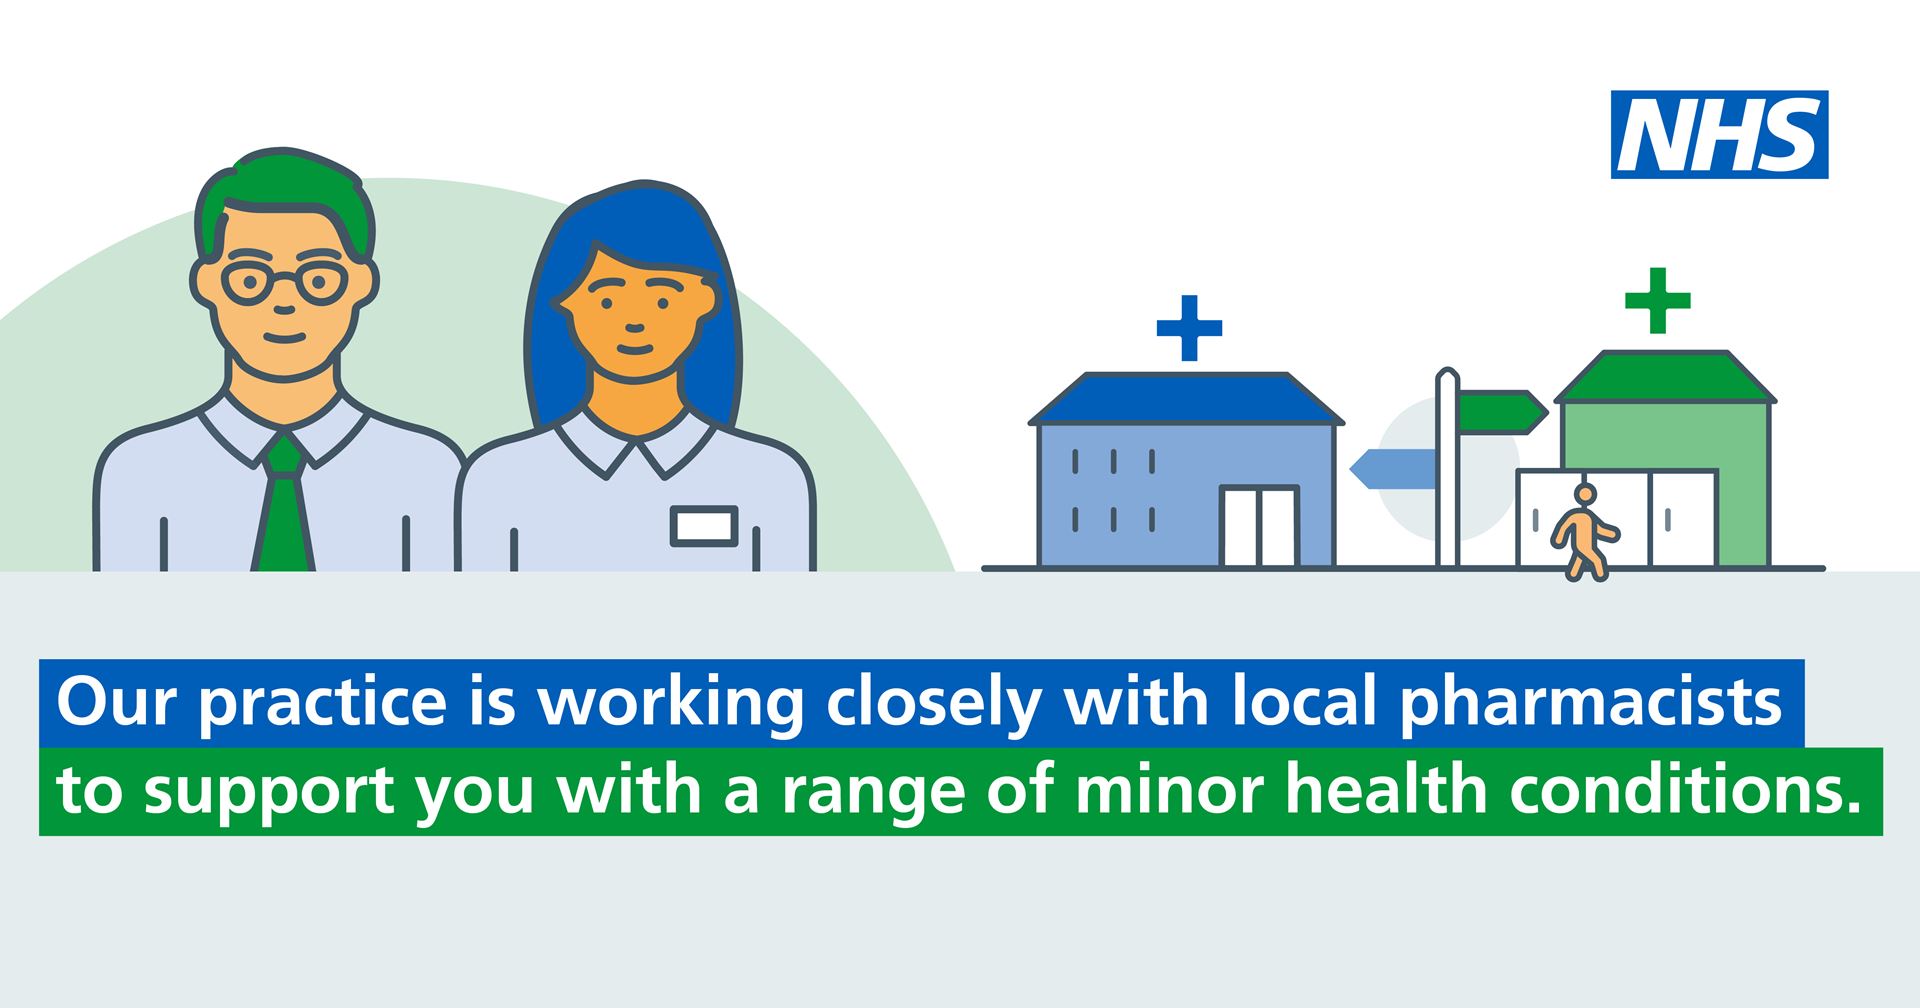 a cartoon image of pharmacists, a GP surgery, a pharmacy, the NHS logo and the words, Our practice is working closely with local pharmacists to support you with a range of minor health conditions